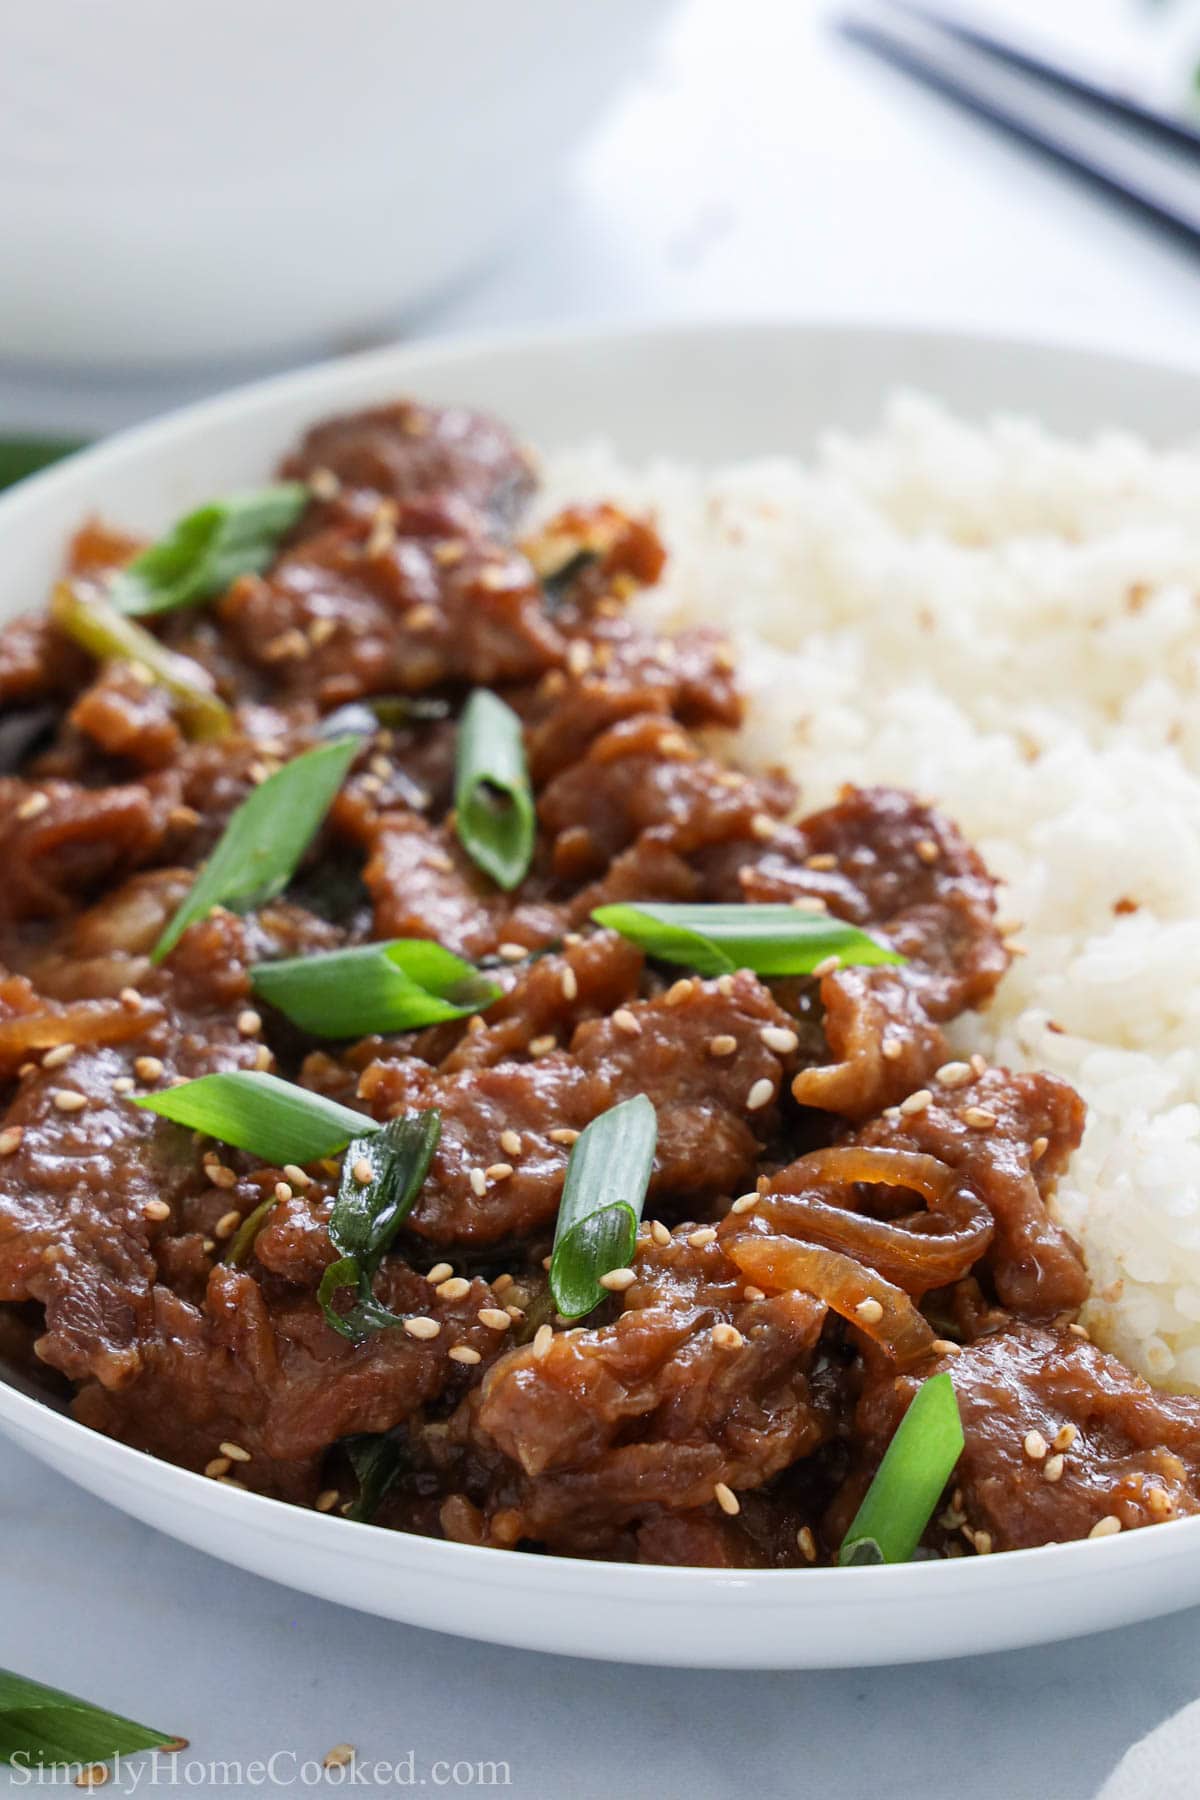 Vertical close up image of Mongolian Beef with green onions and rice on a white plate